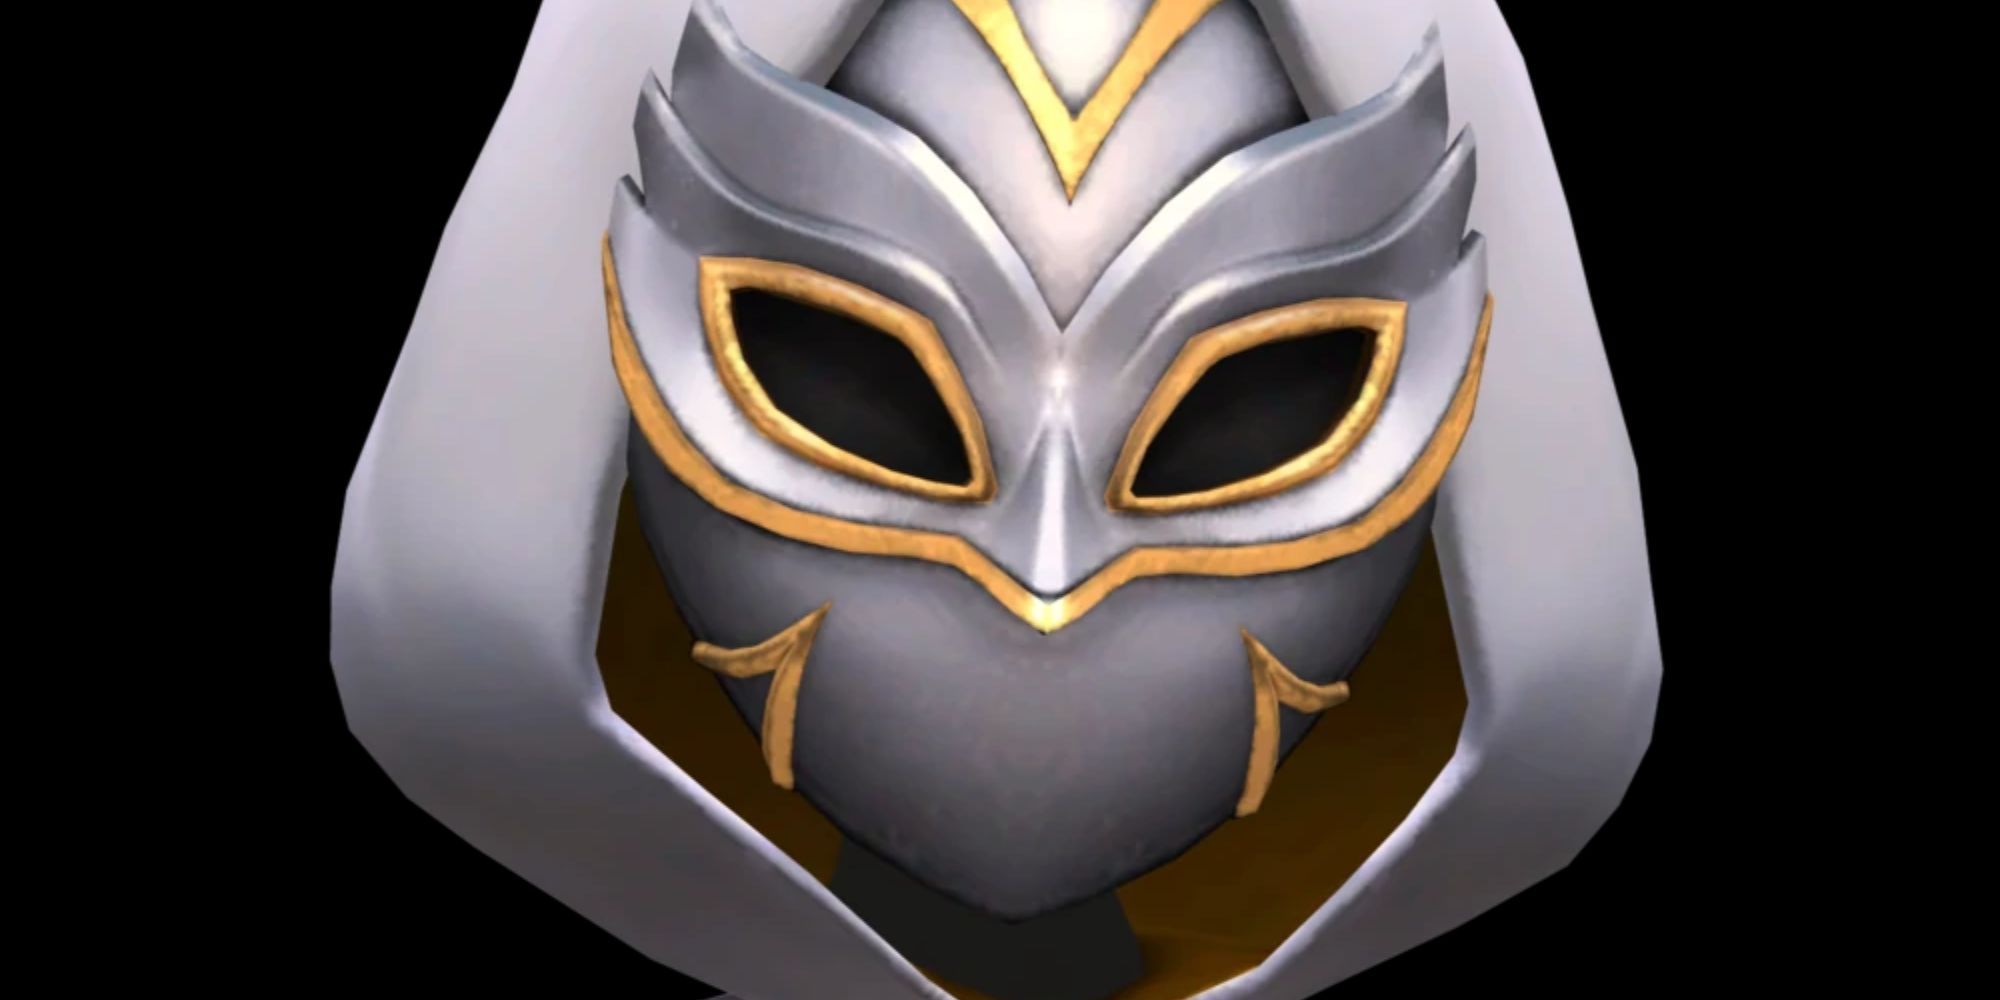 A Wylde Flowers image showcases the Raven's silver and gold costume